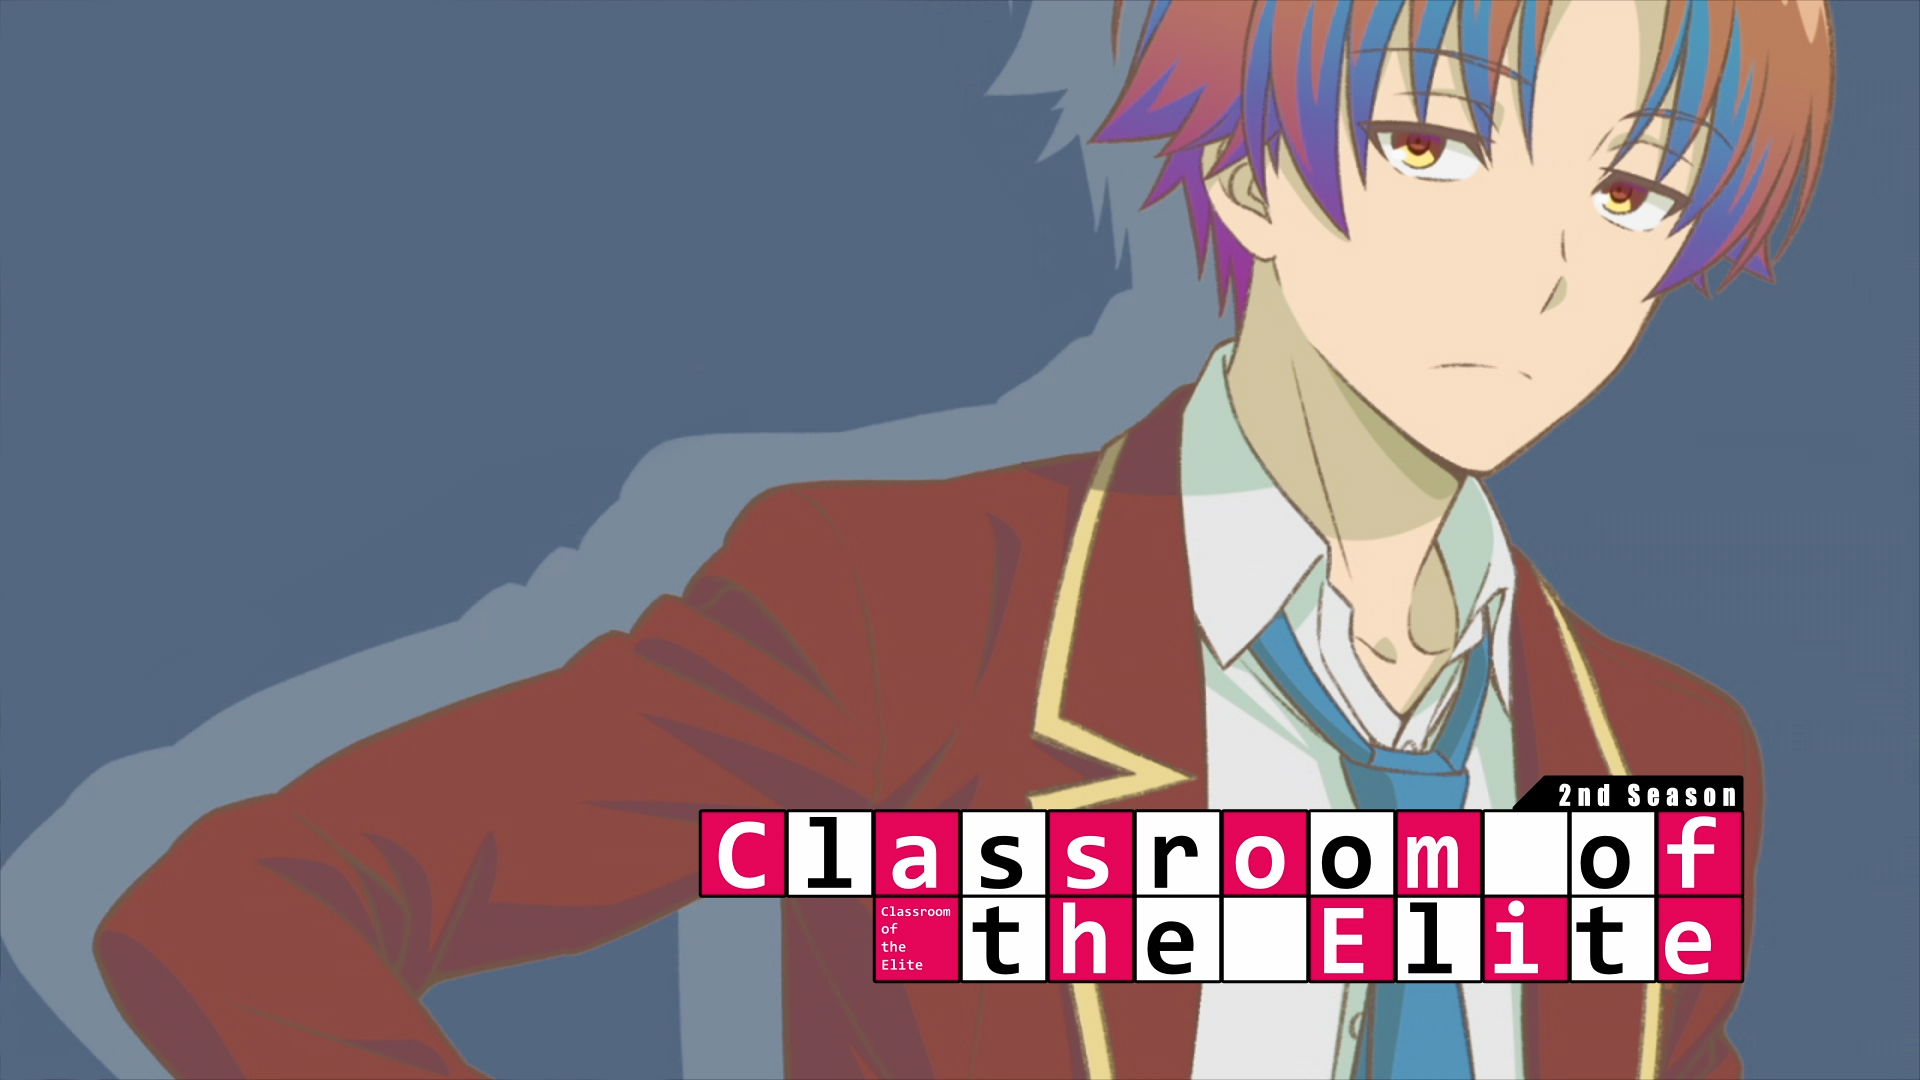 Anime Classroom of the Elite HD Wallpaper by theeditorpanda